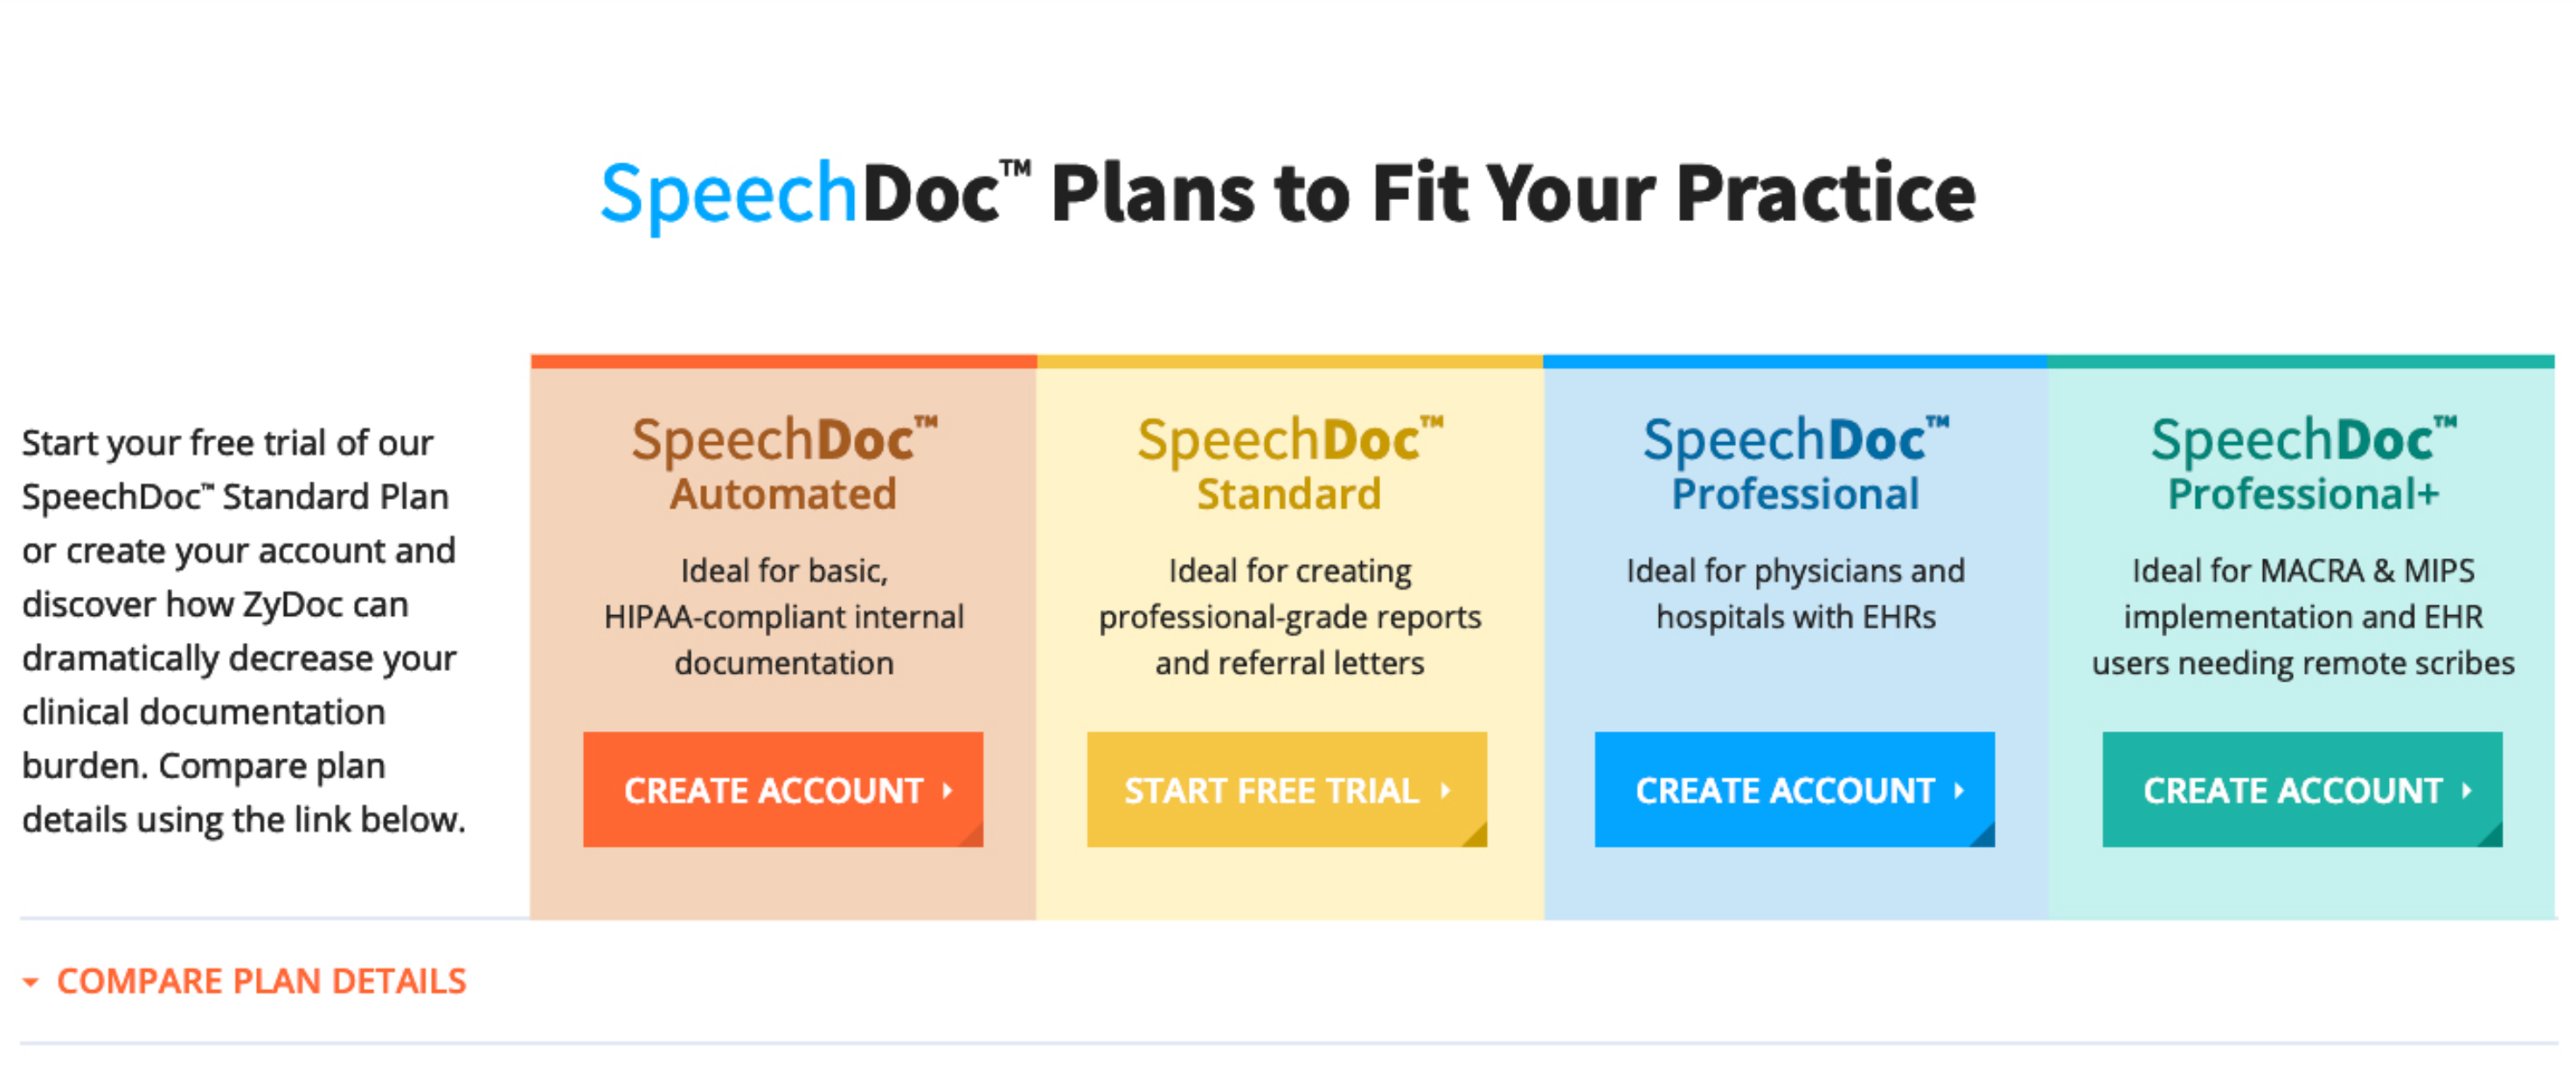 SpeechDoc Plans to Fit Your Practice with transparent pricing starting at $0.05 per line with >90% of jobs returned within 2 hours.